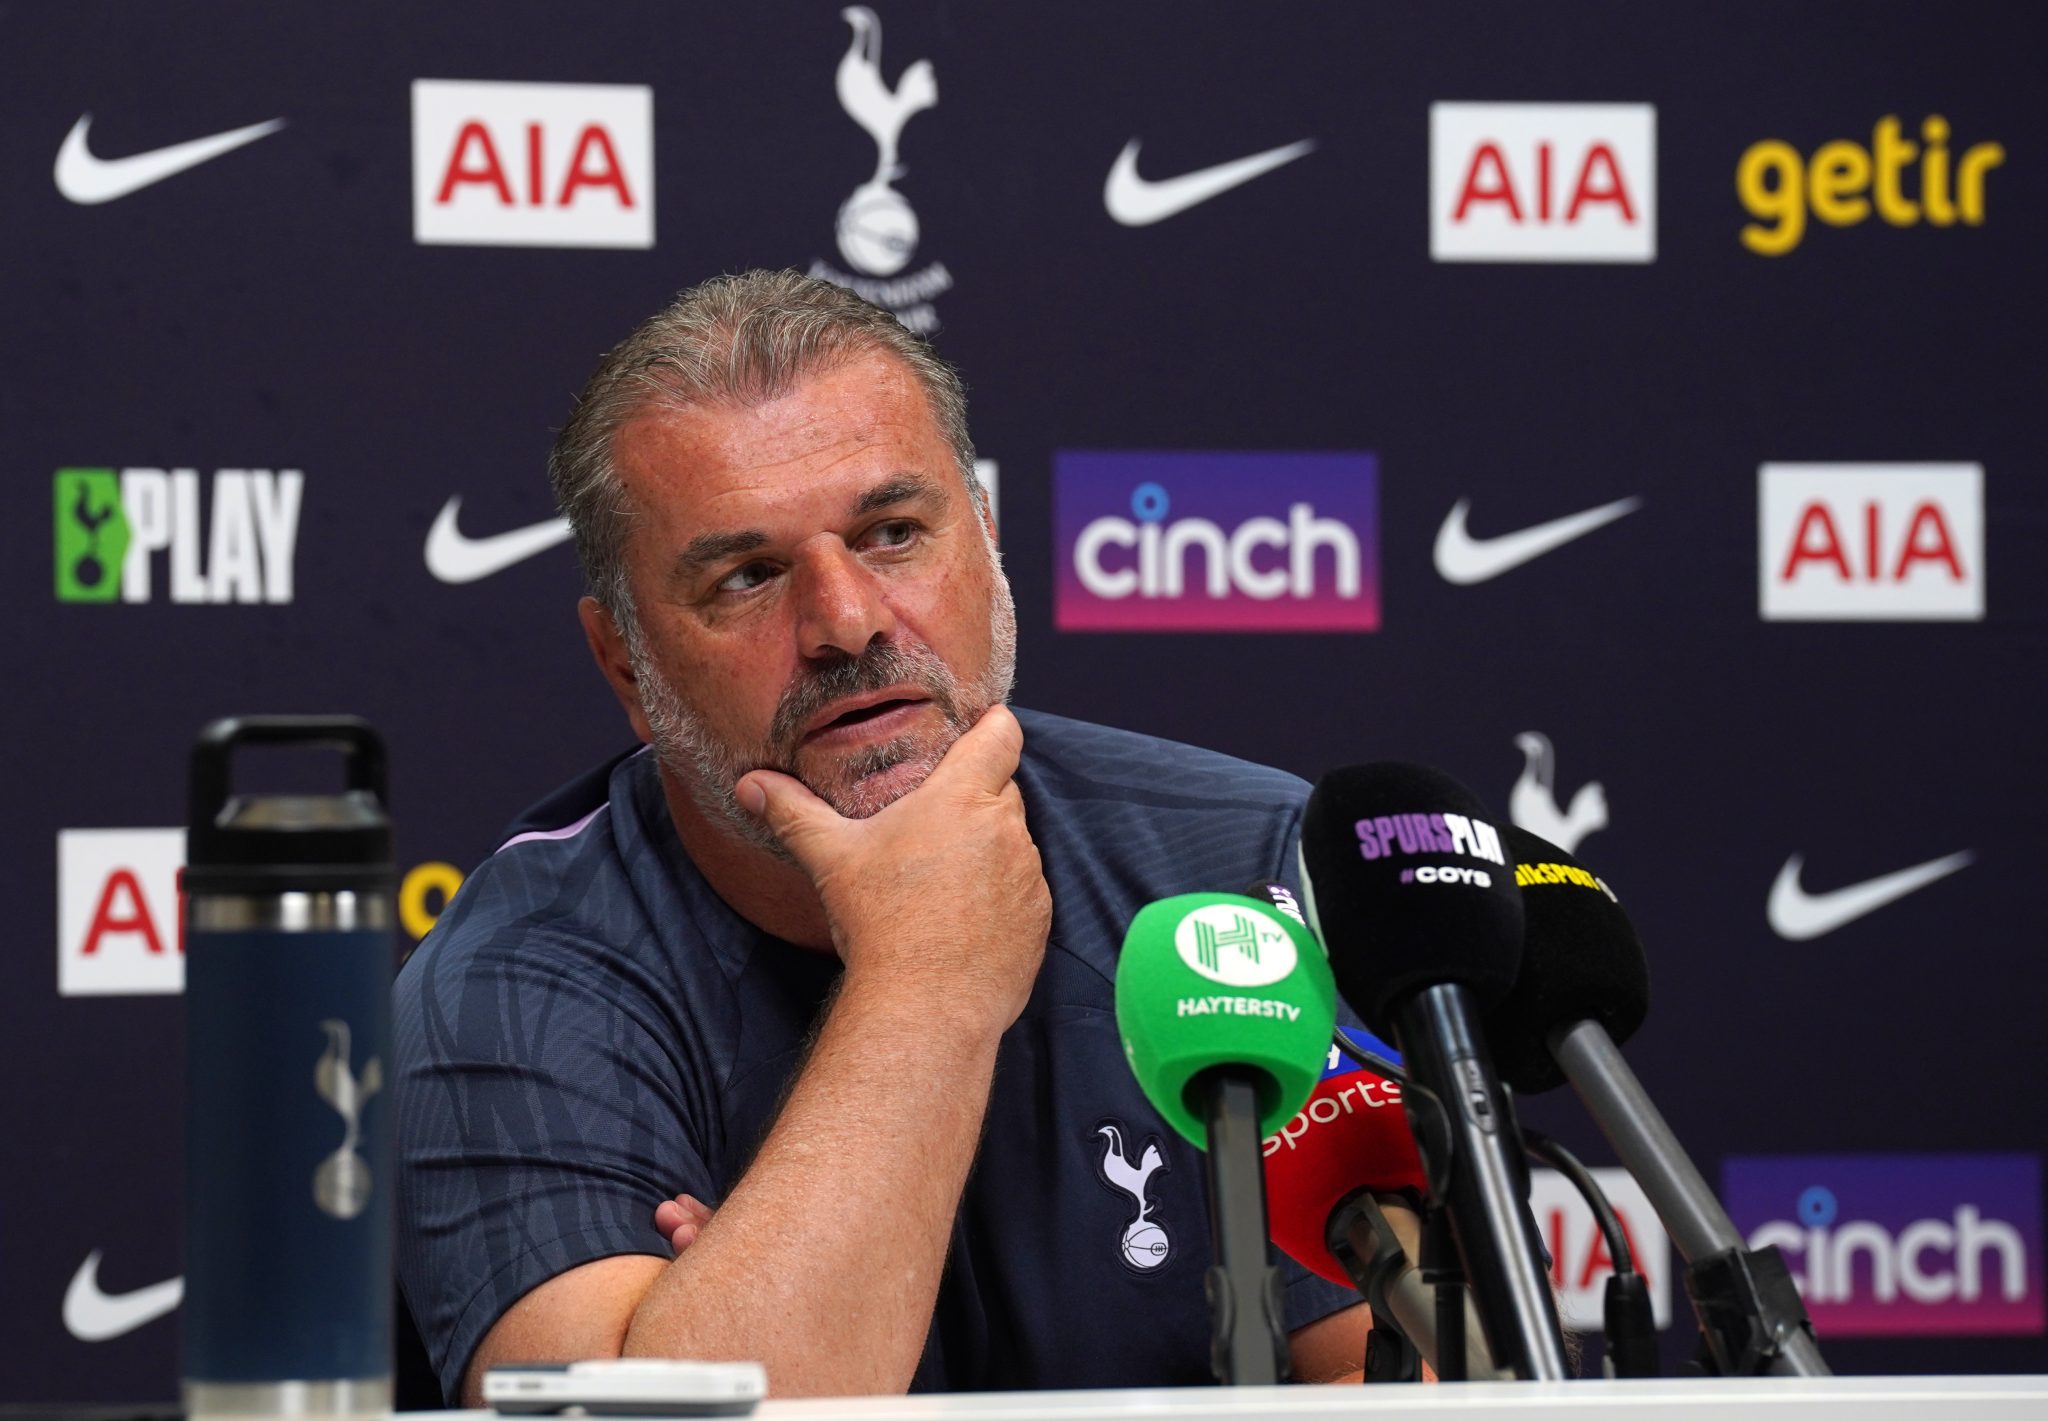 Ange Postecoglou: I’ll lay out vision for success at Spurs on meeting Harry Kane